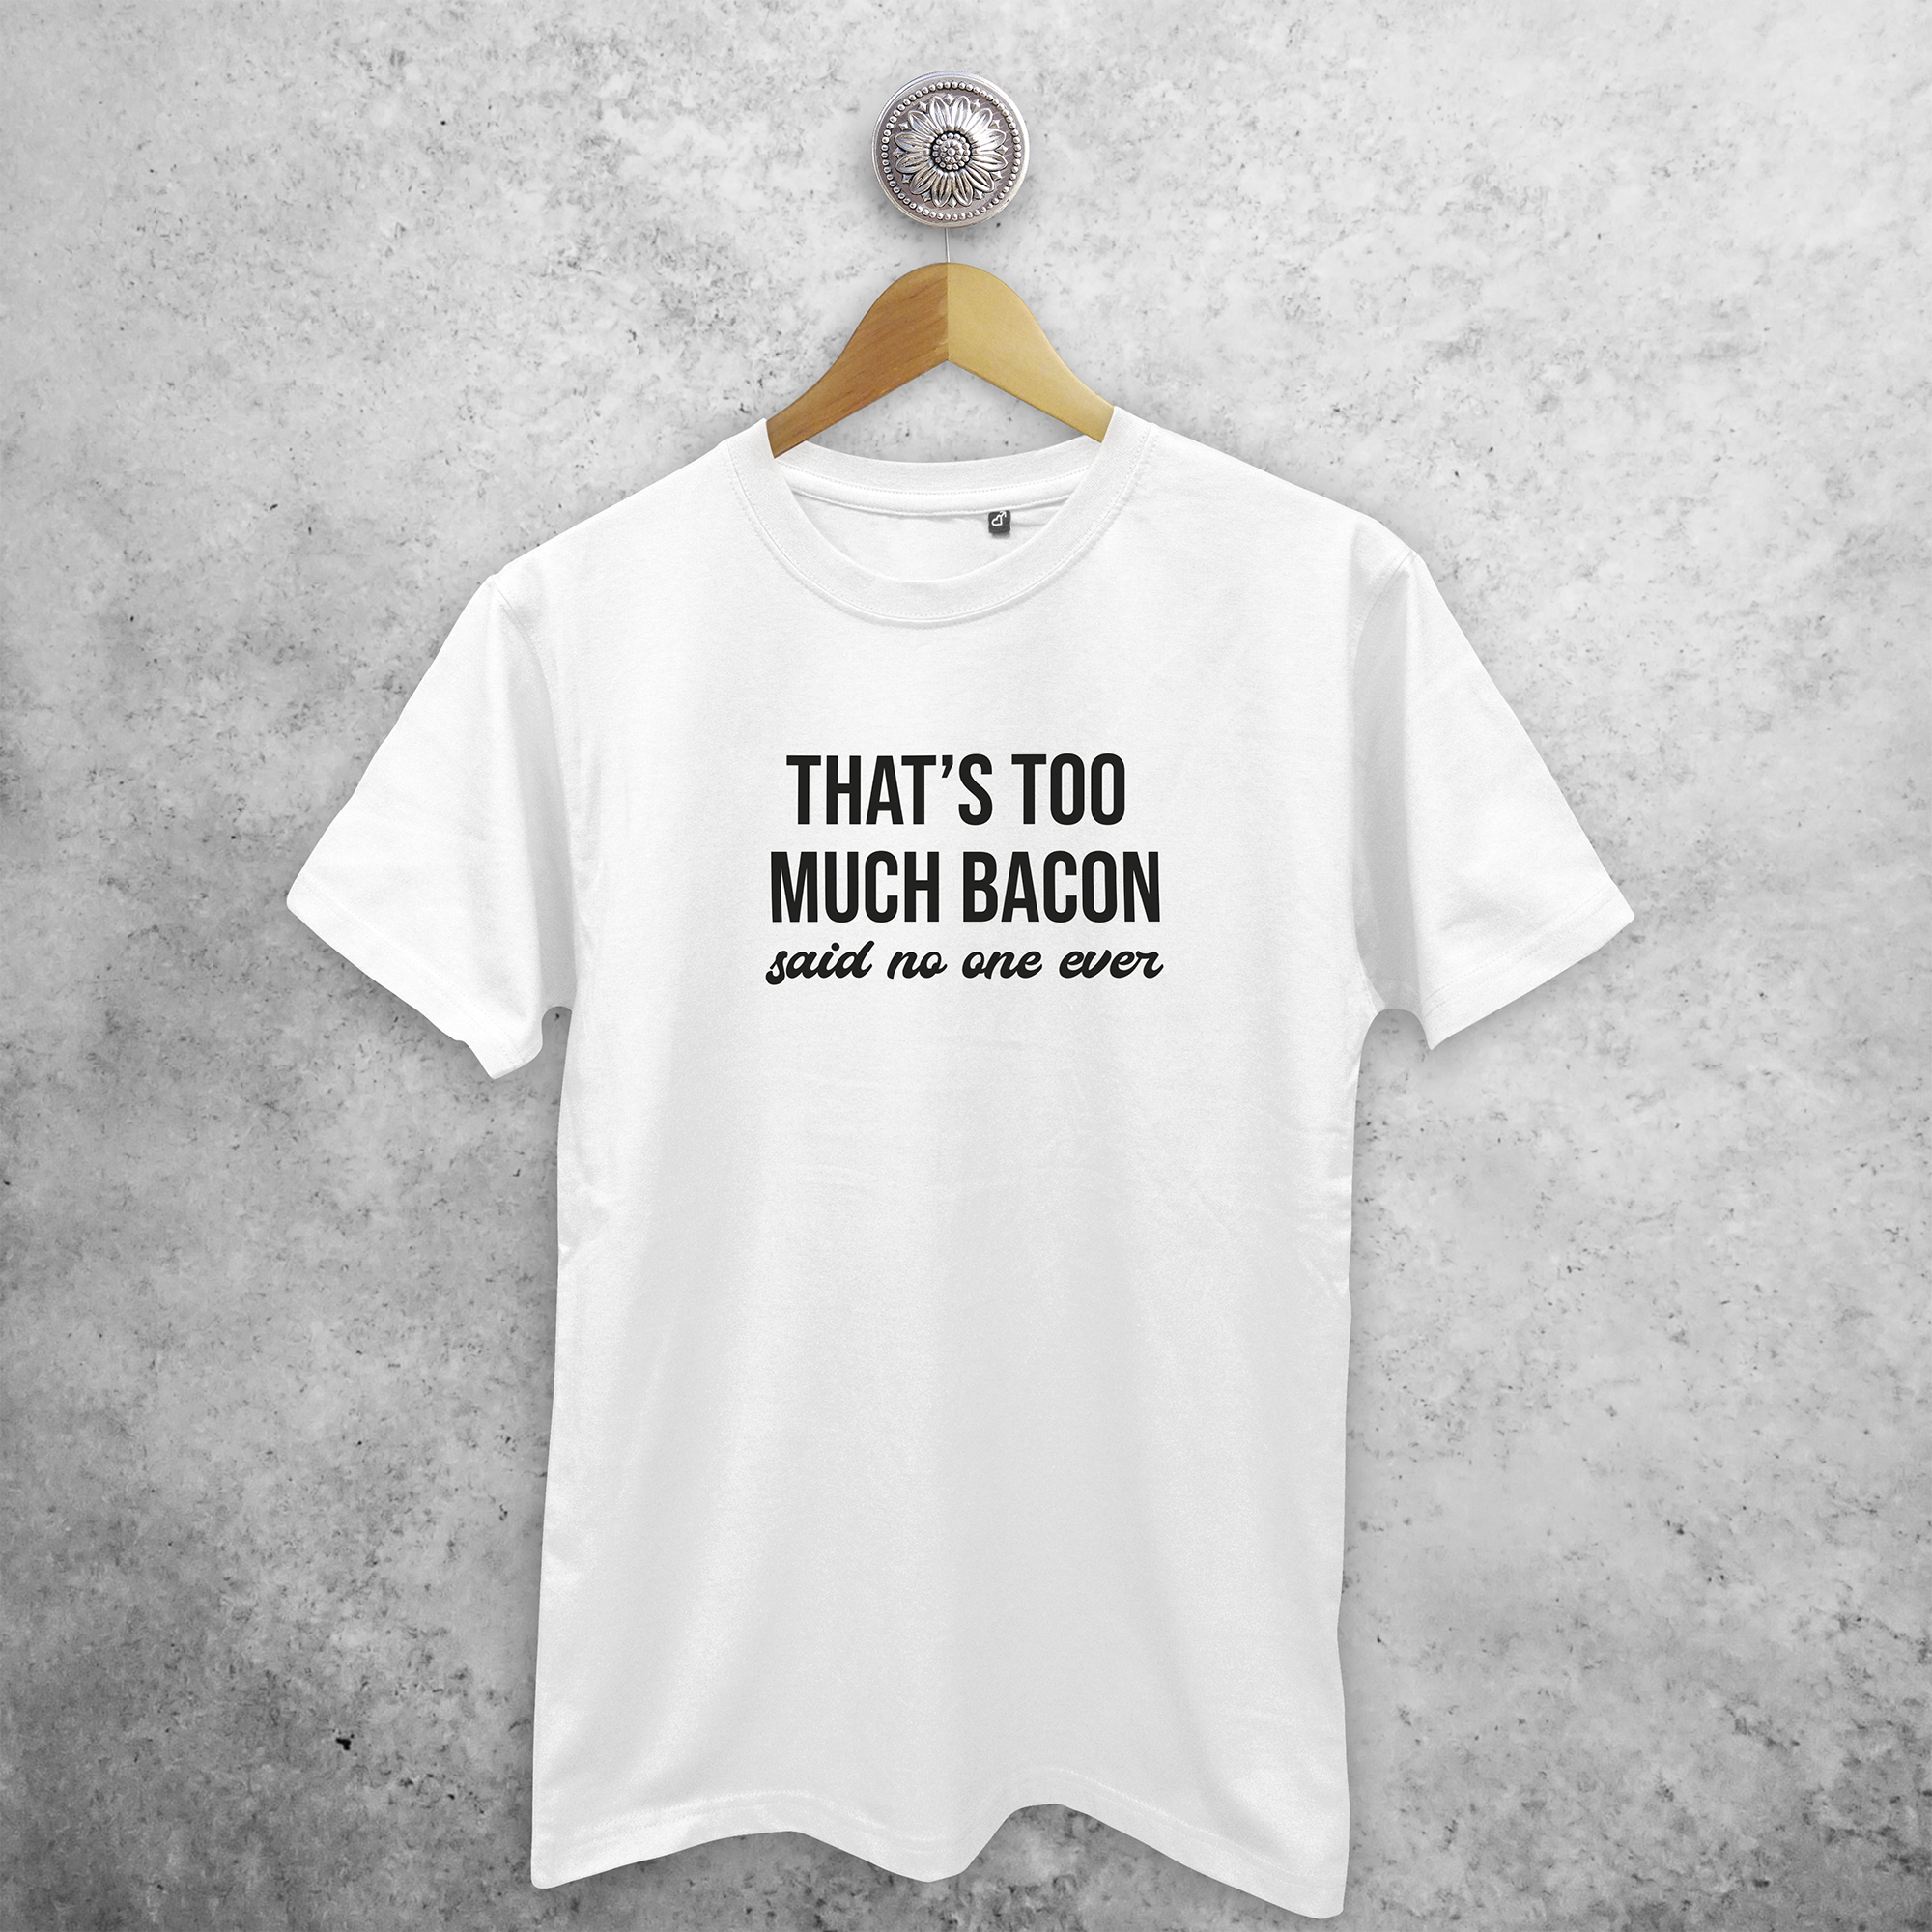 'That's too much bacon - said no one ever' volwassene shirt